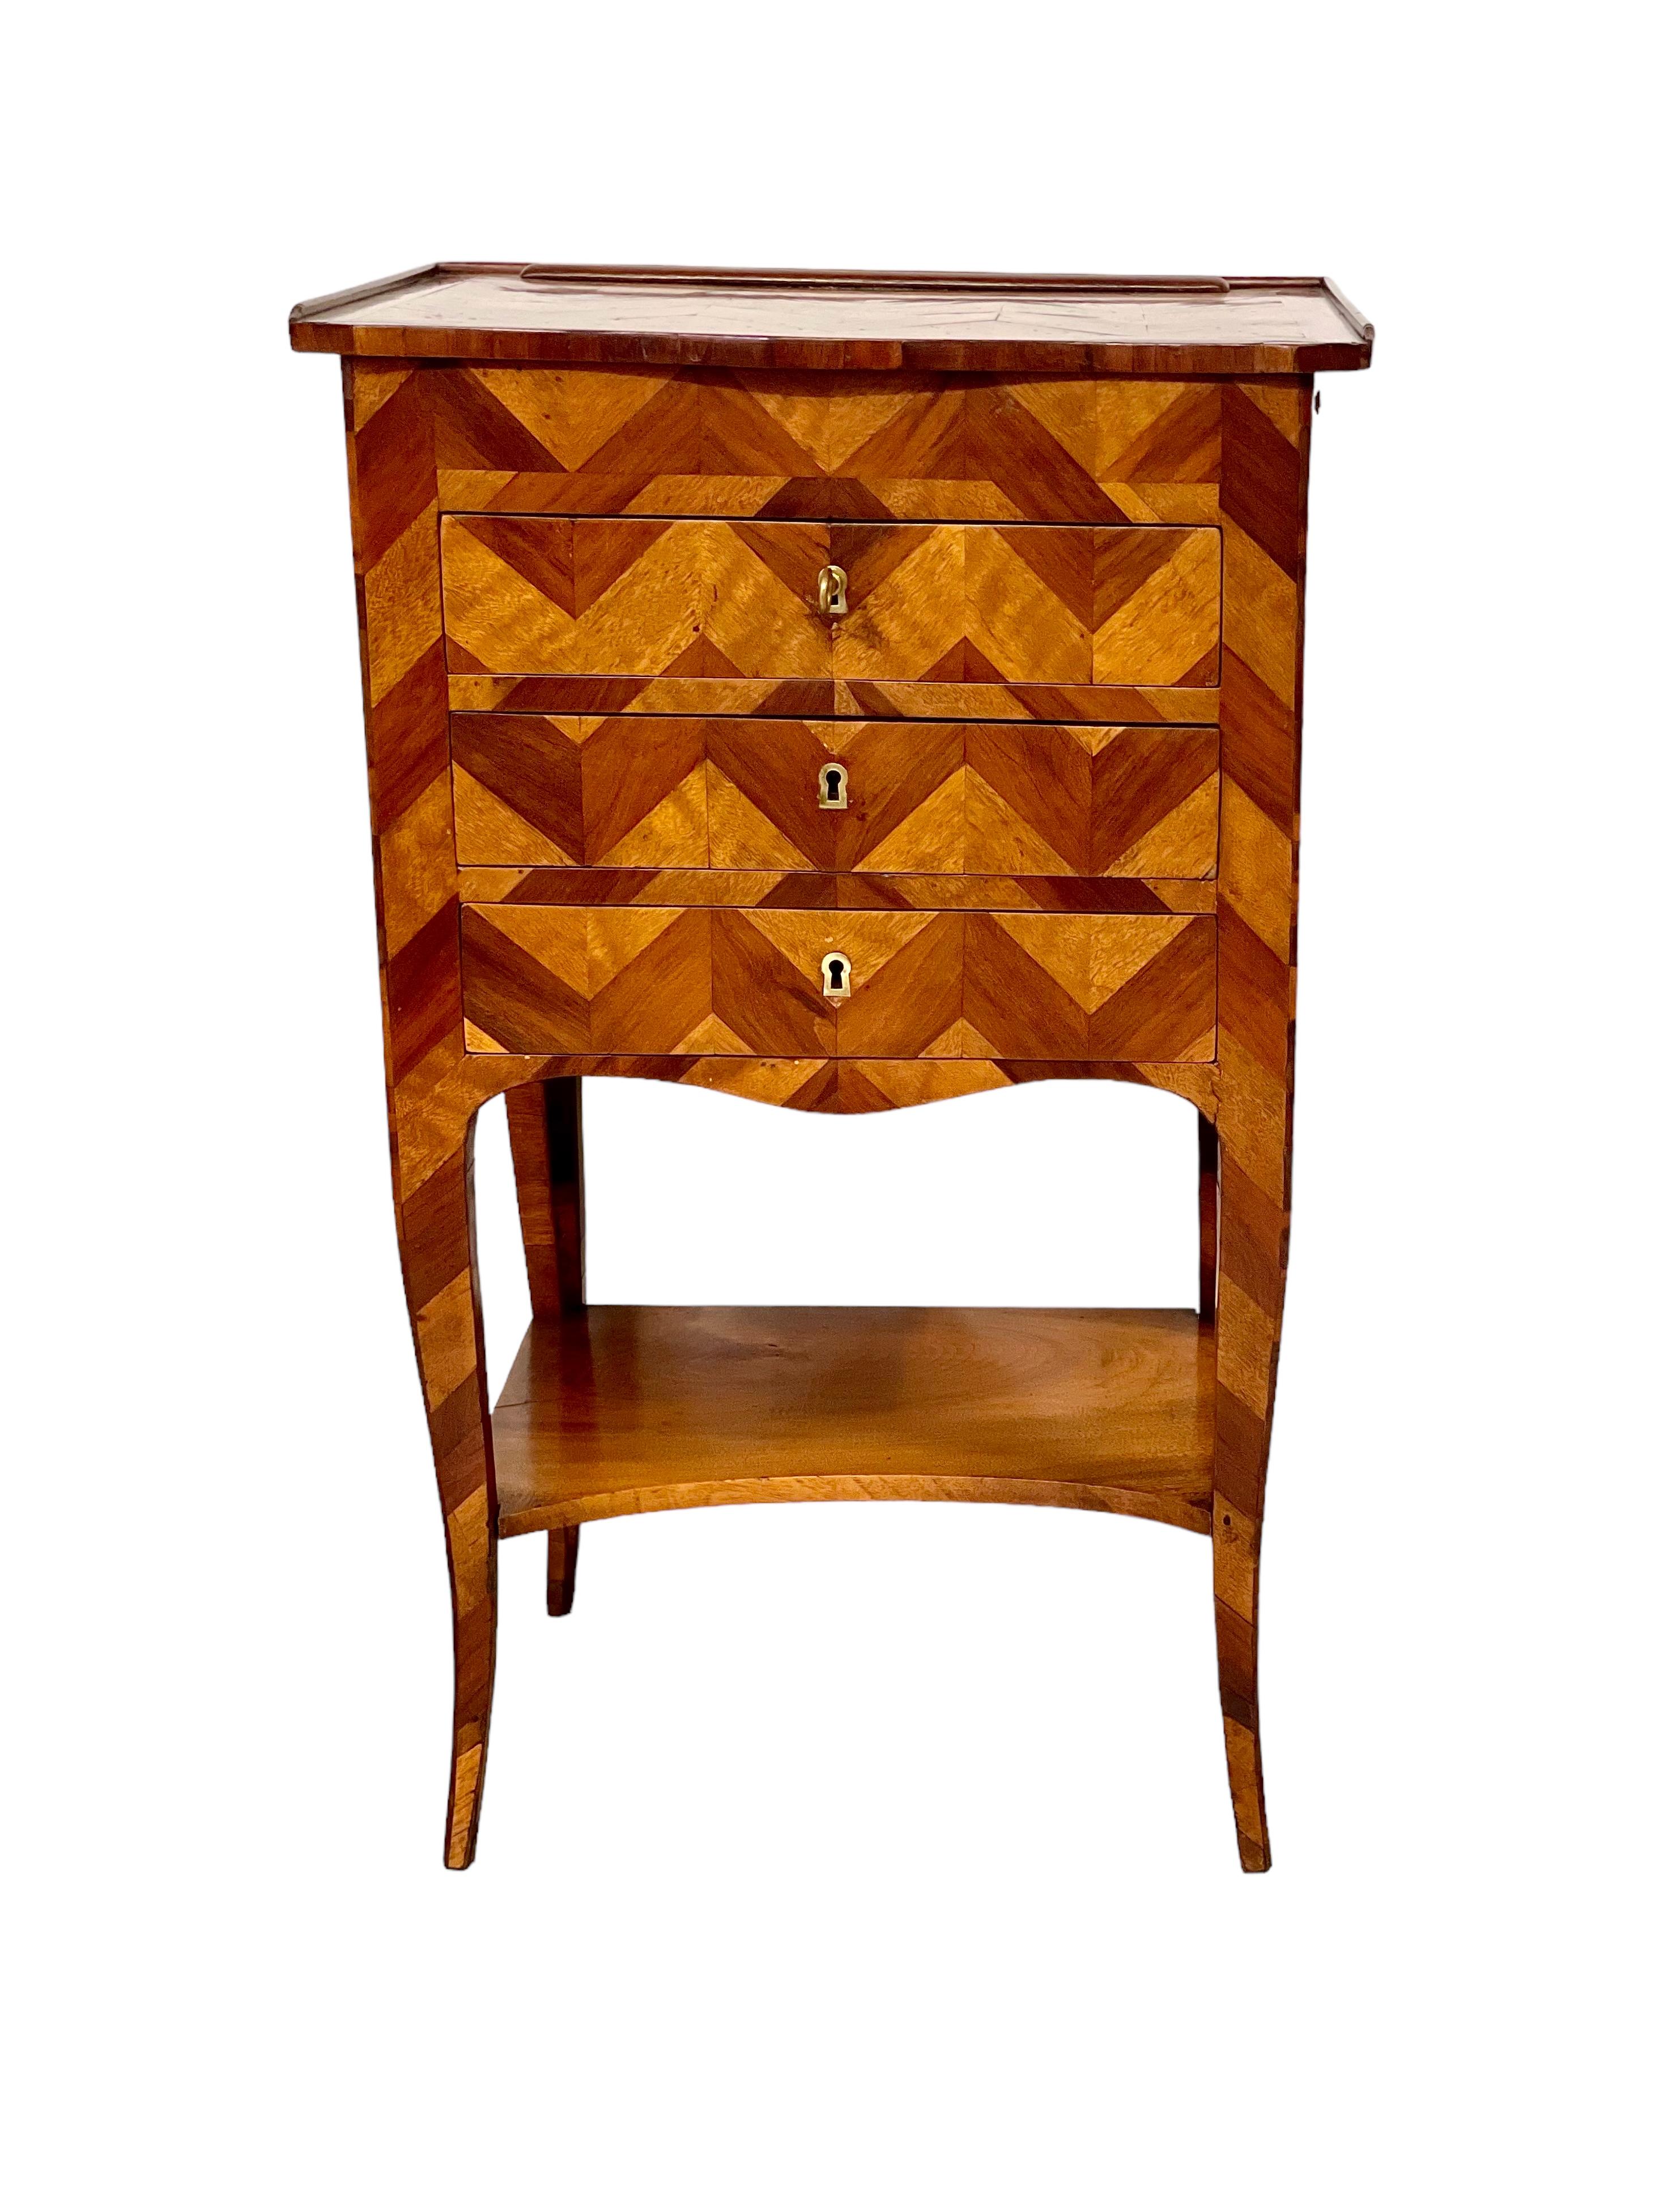 A fascinating and very attractive Louis XV petite commode in veneered wood, with a geometric inlaid marquetry decoration. Three slim drawers open to the front, with another to the side, providing lots of useful storage space. The most intriguing